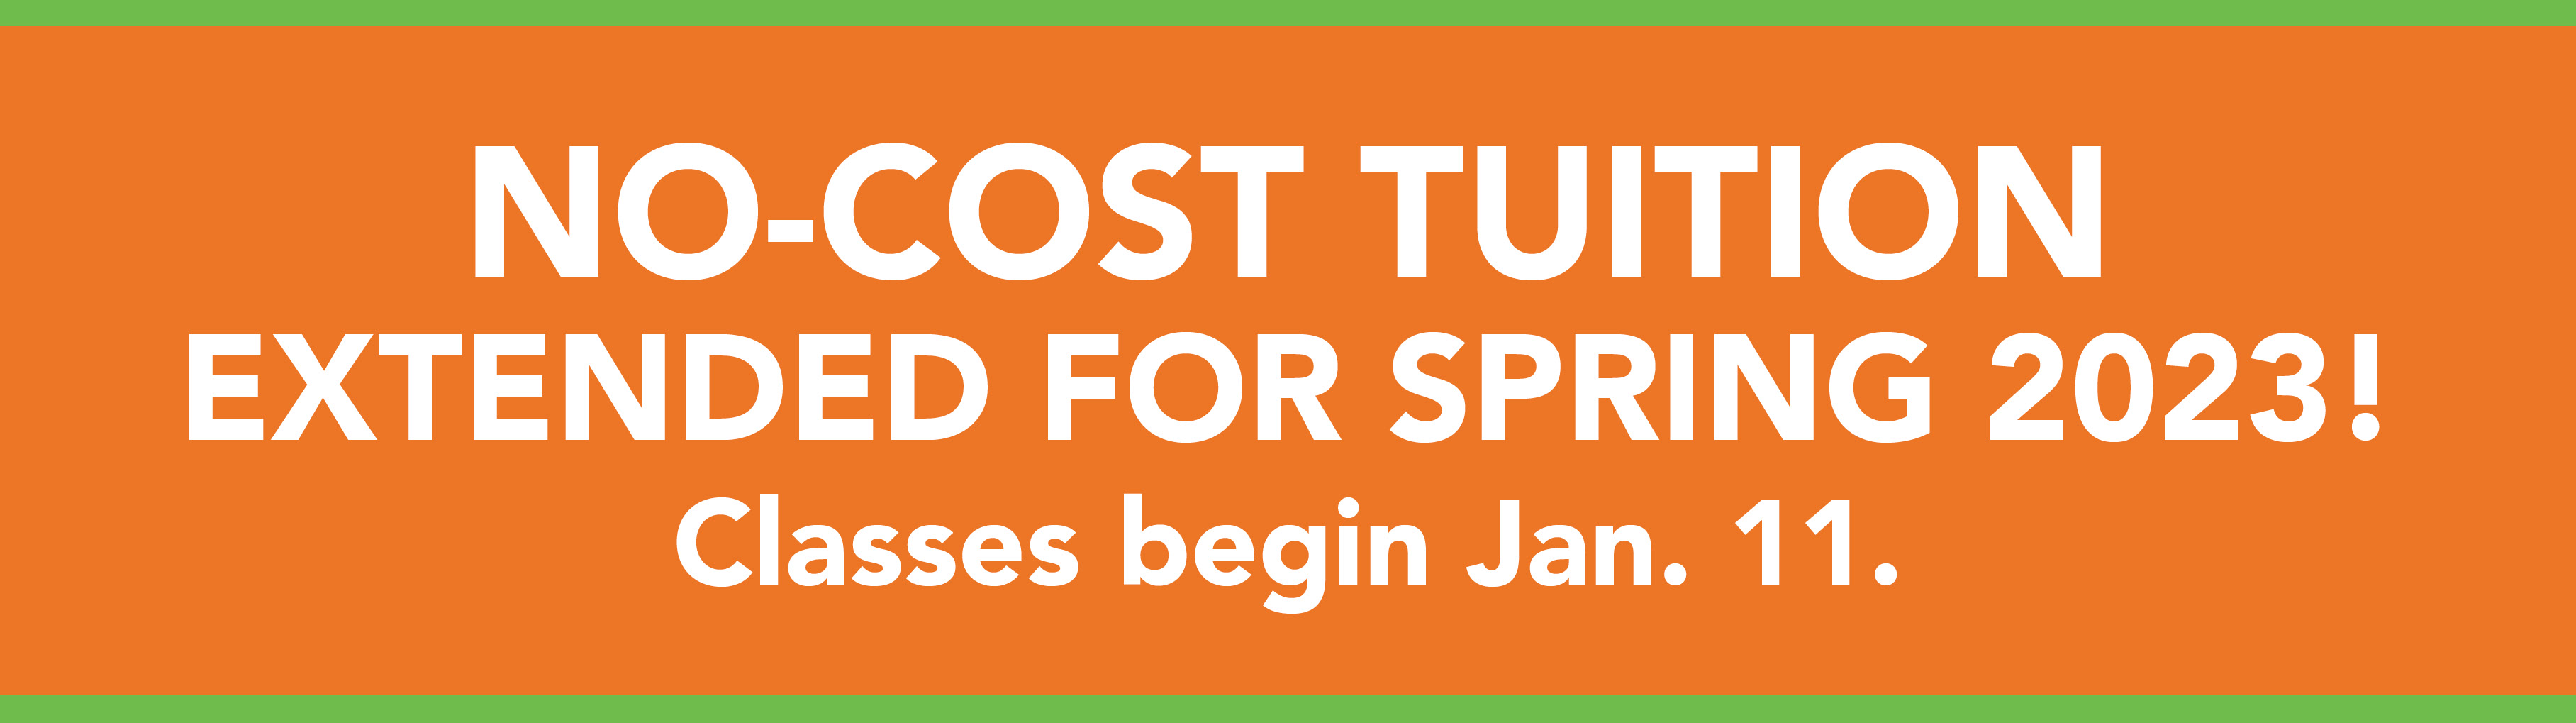 No Cost Tuition for Spring 2023 Extended